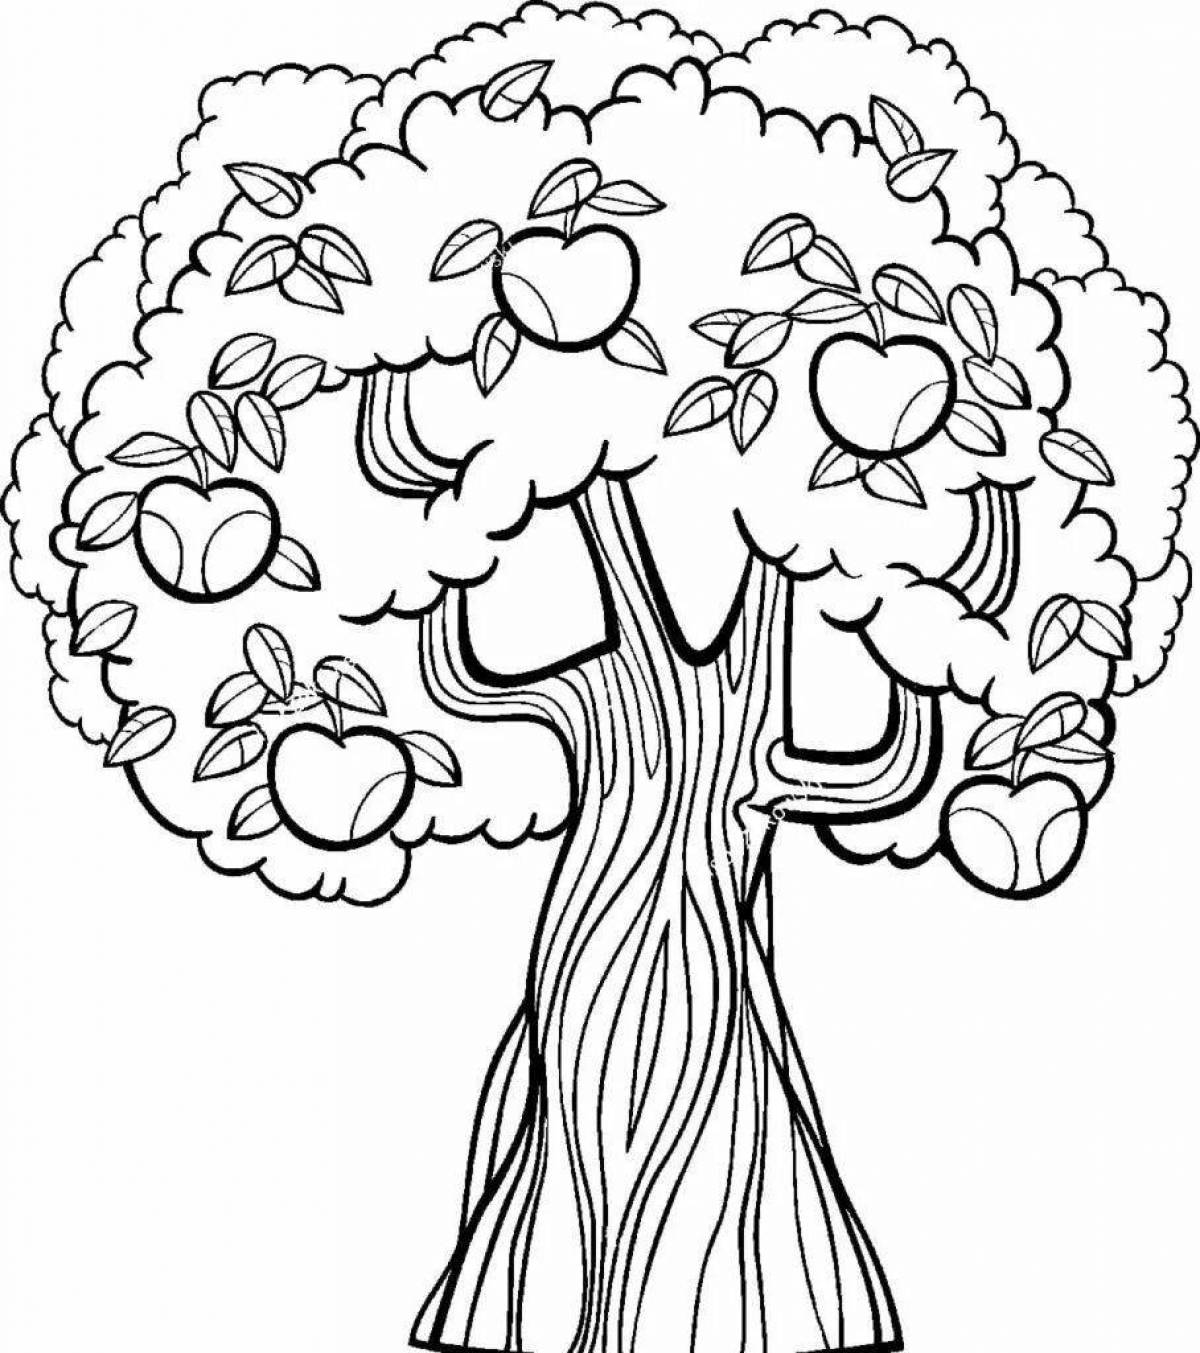 Shiny apple tree coloring book